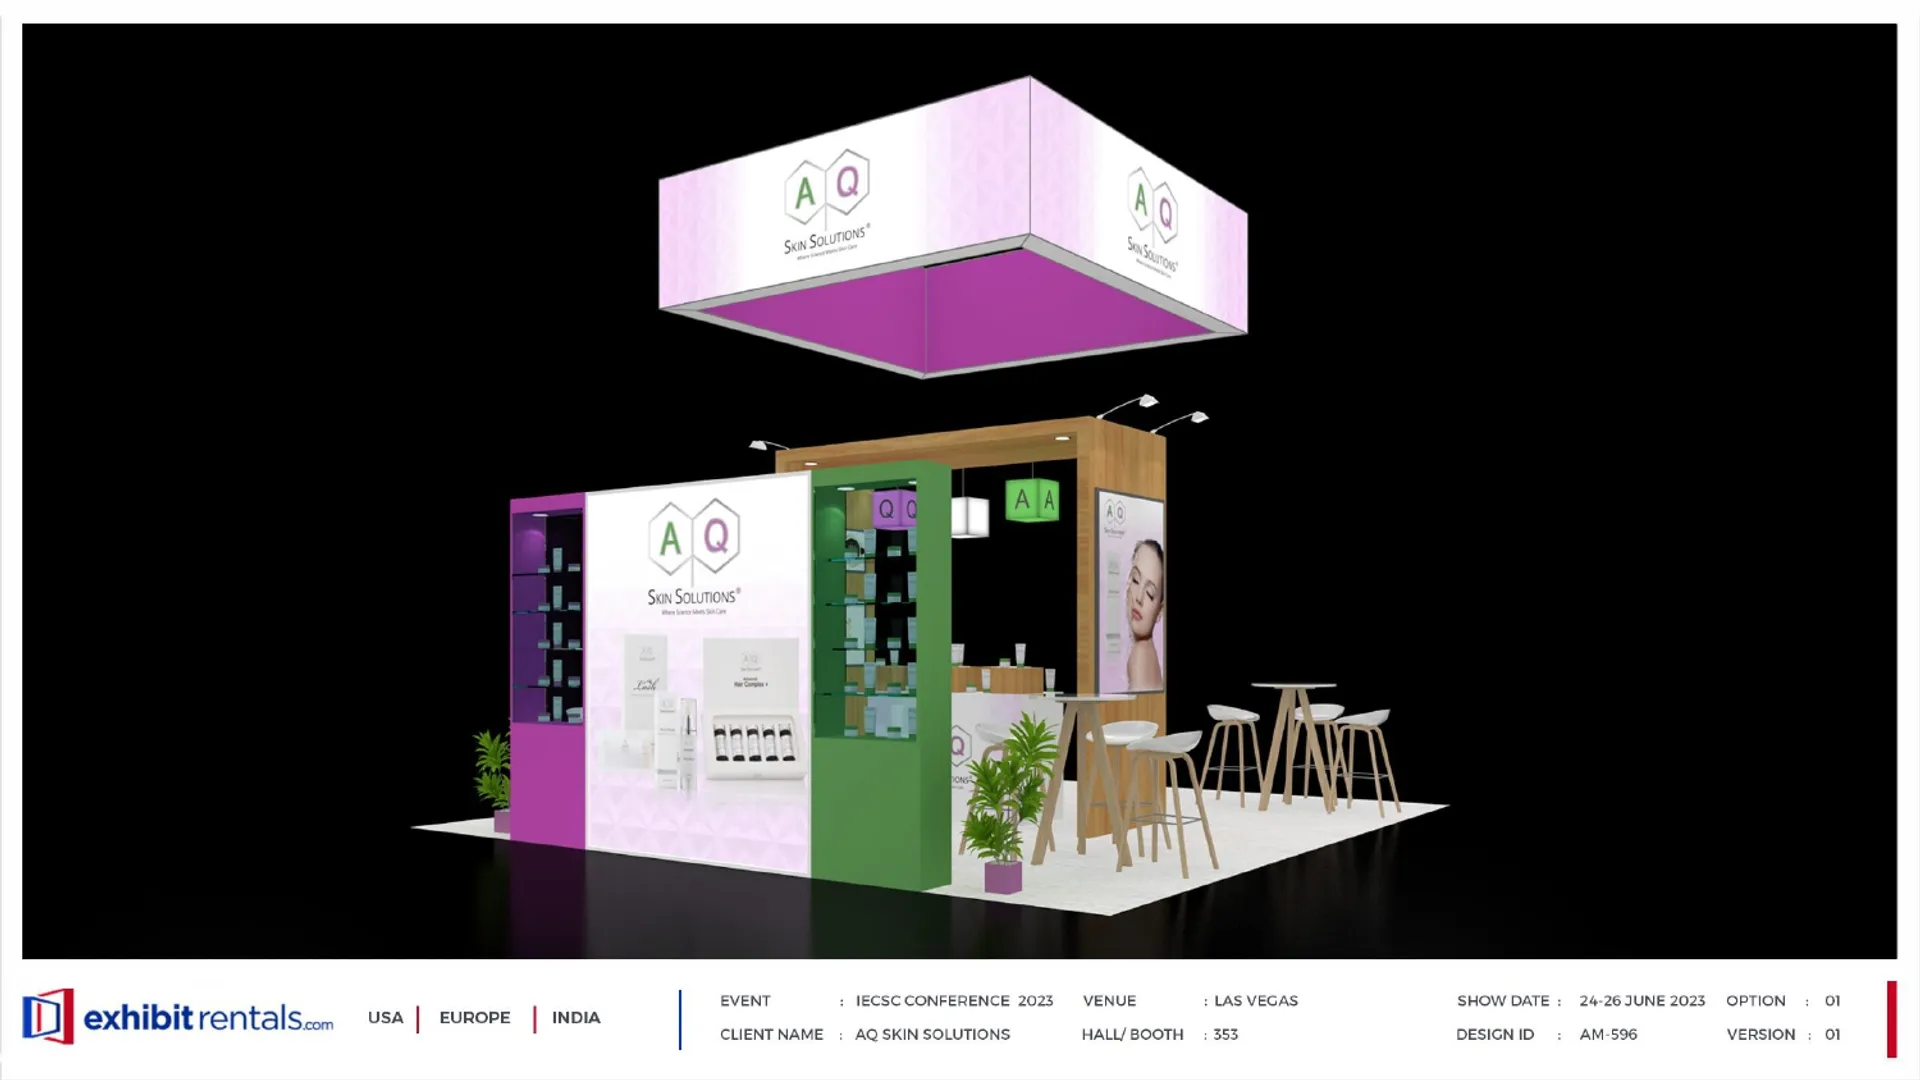 booth-design-projects/Exhibit-Rentals/2024-04-18-20x20-ISLAND-Project-85/1.1_AQ Skin Solutions_IECSC Conference_ER design proposal -17_page-0001-zq6d6u.jpg